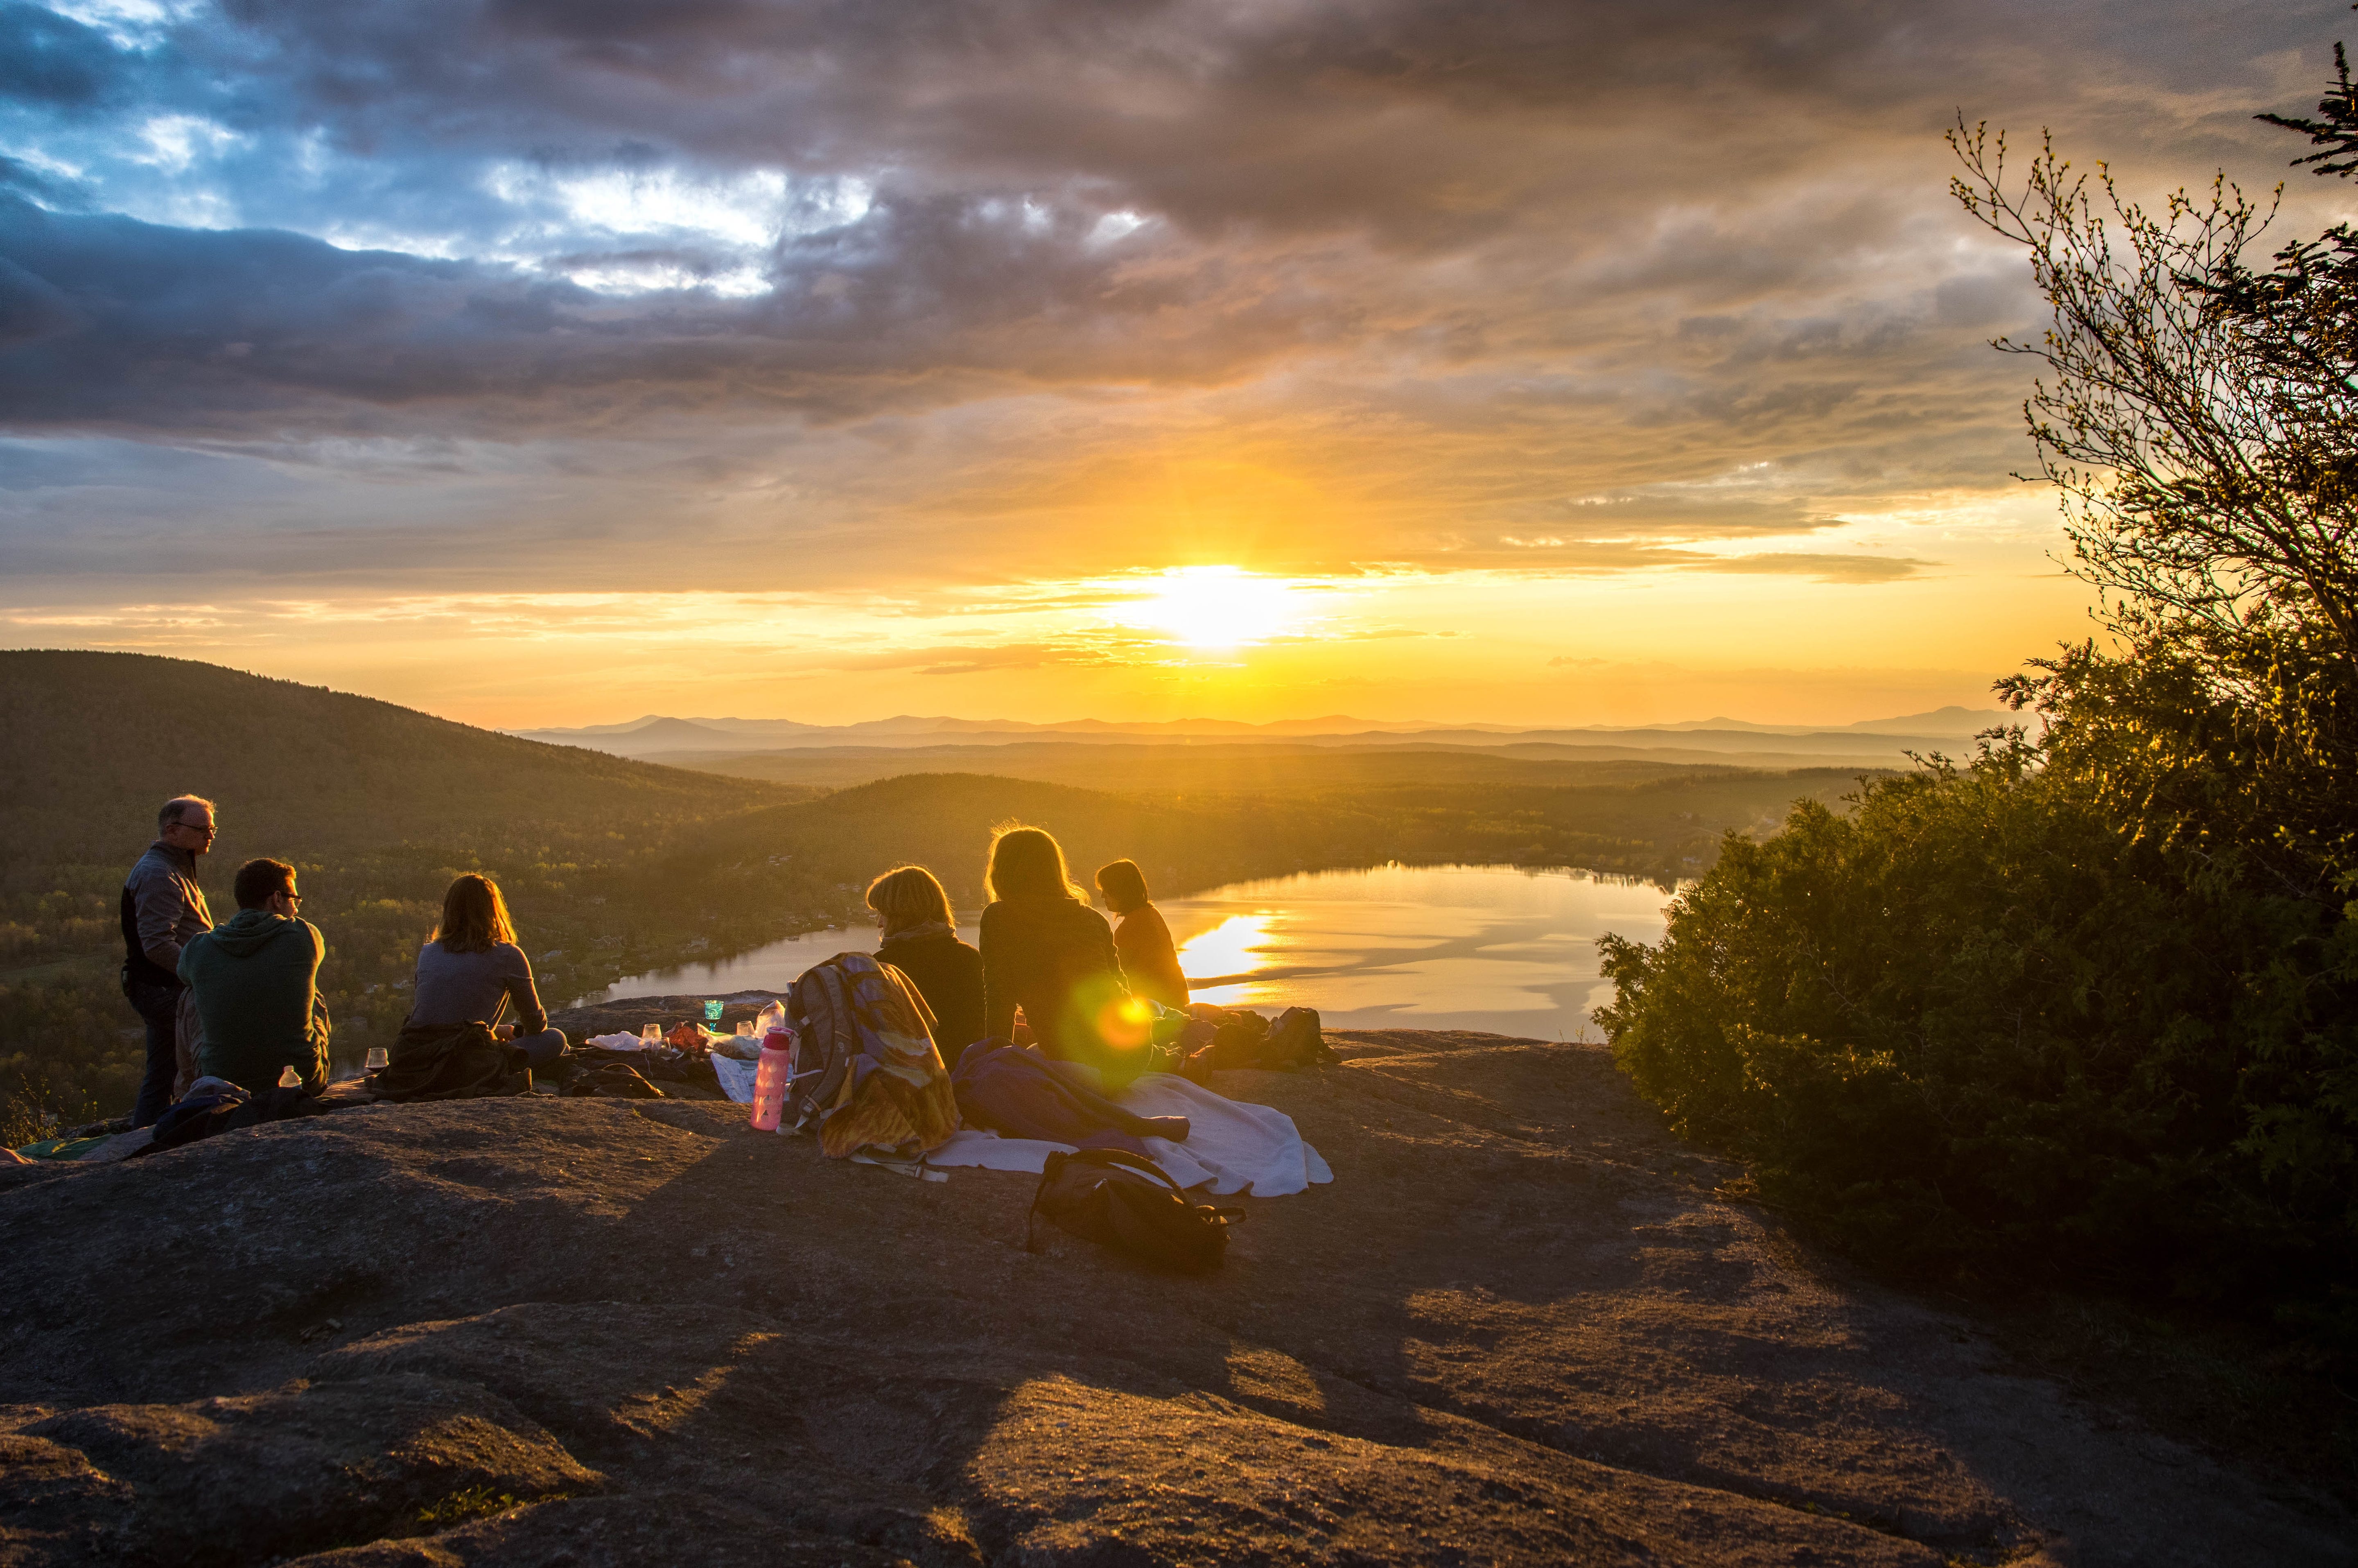 A group of people sitting on rocky terrain as the sun rises